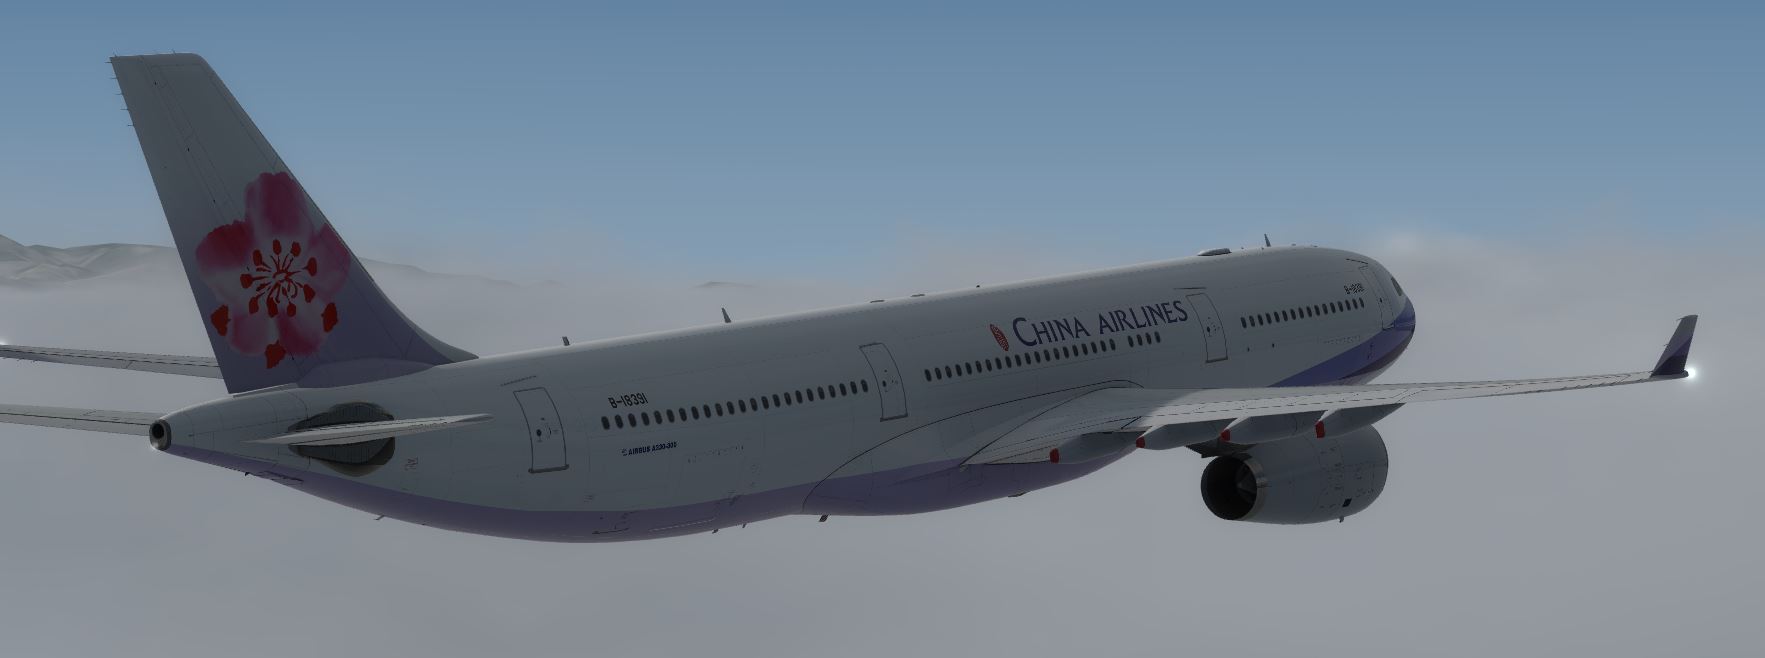 AS A330 ChinaAirline-3021 